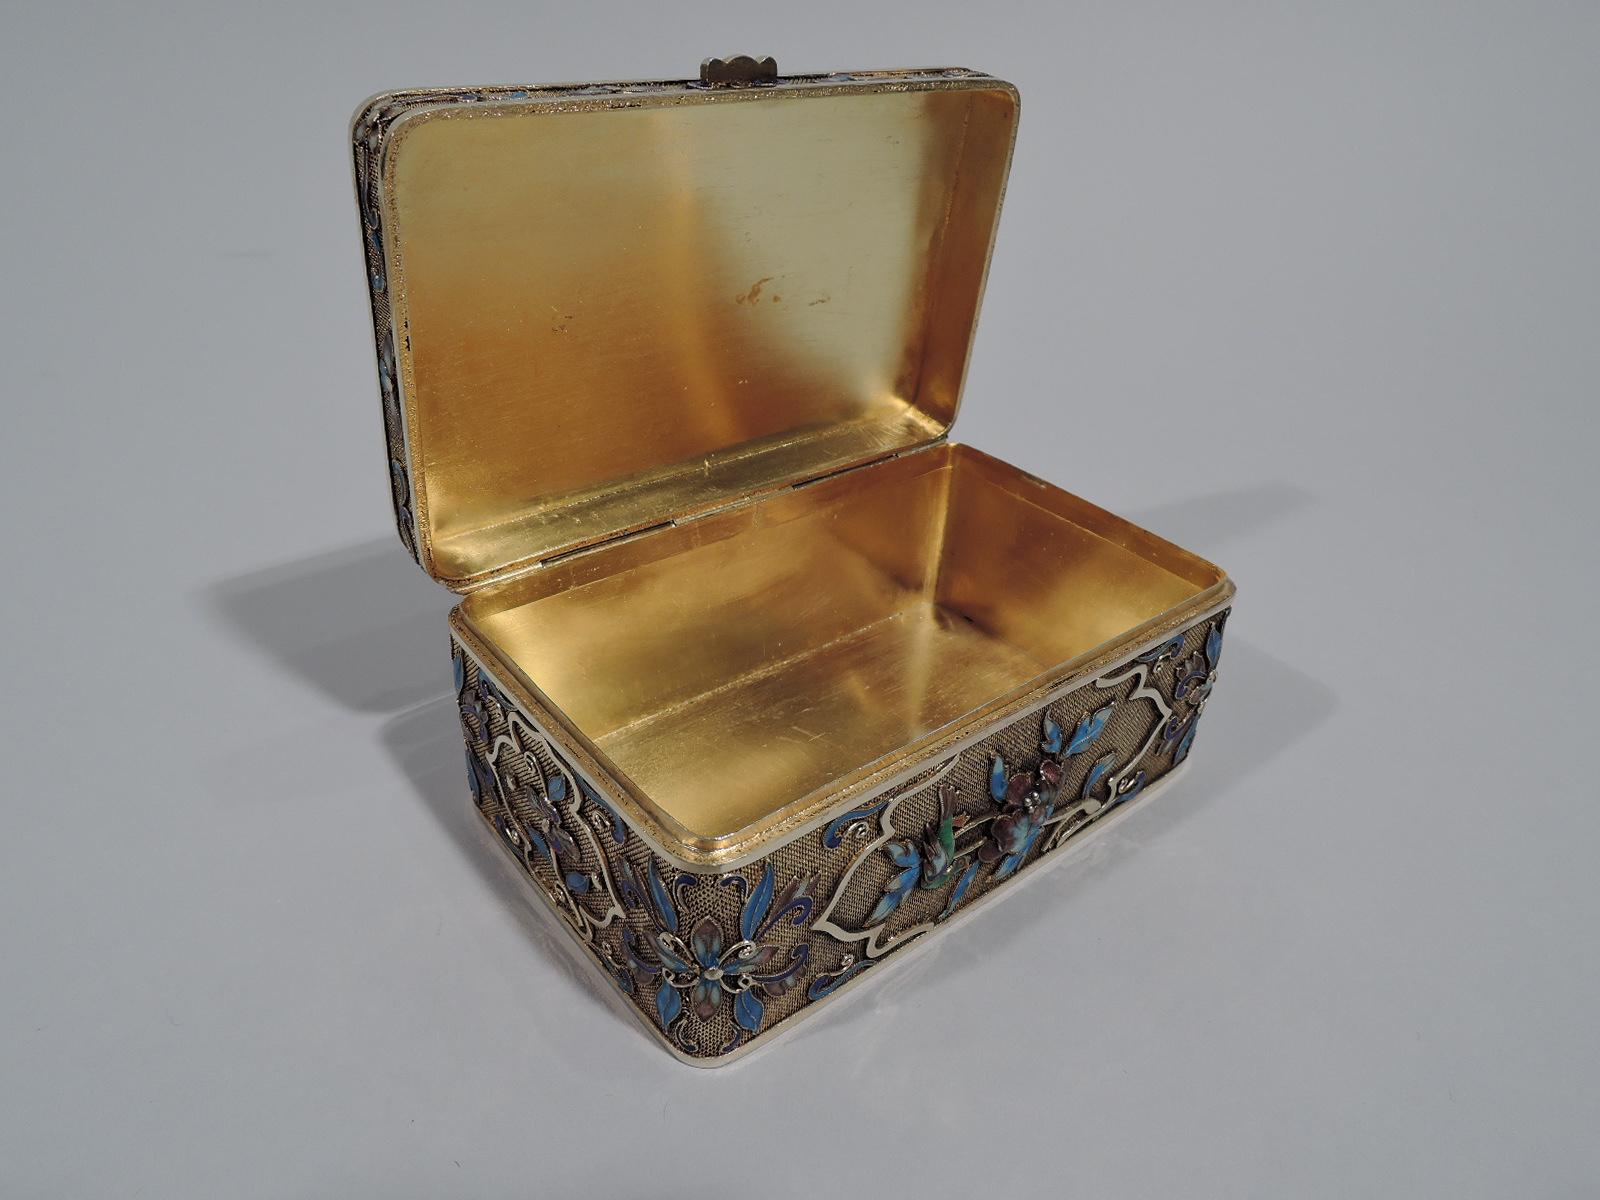 Art Nouveau Antique Chinese Silver Gilt Filigree Box with Enamel and Carved Jade